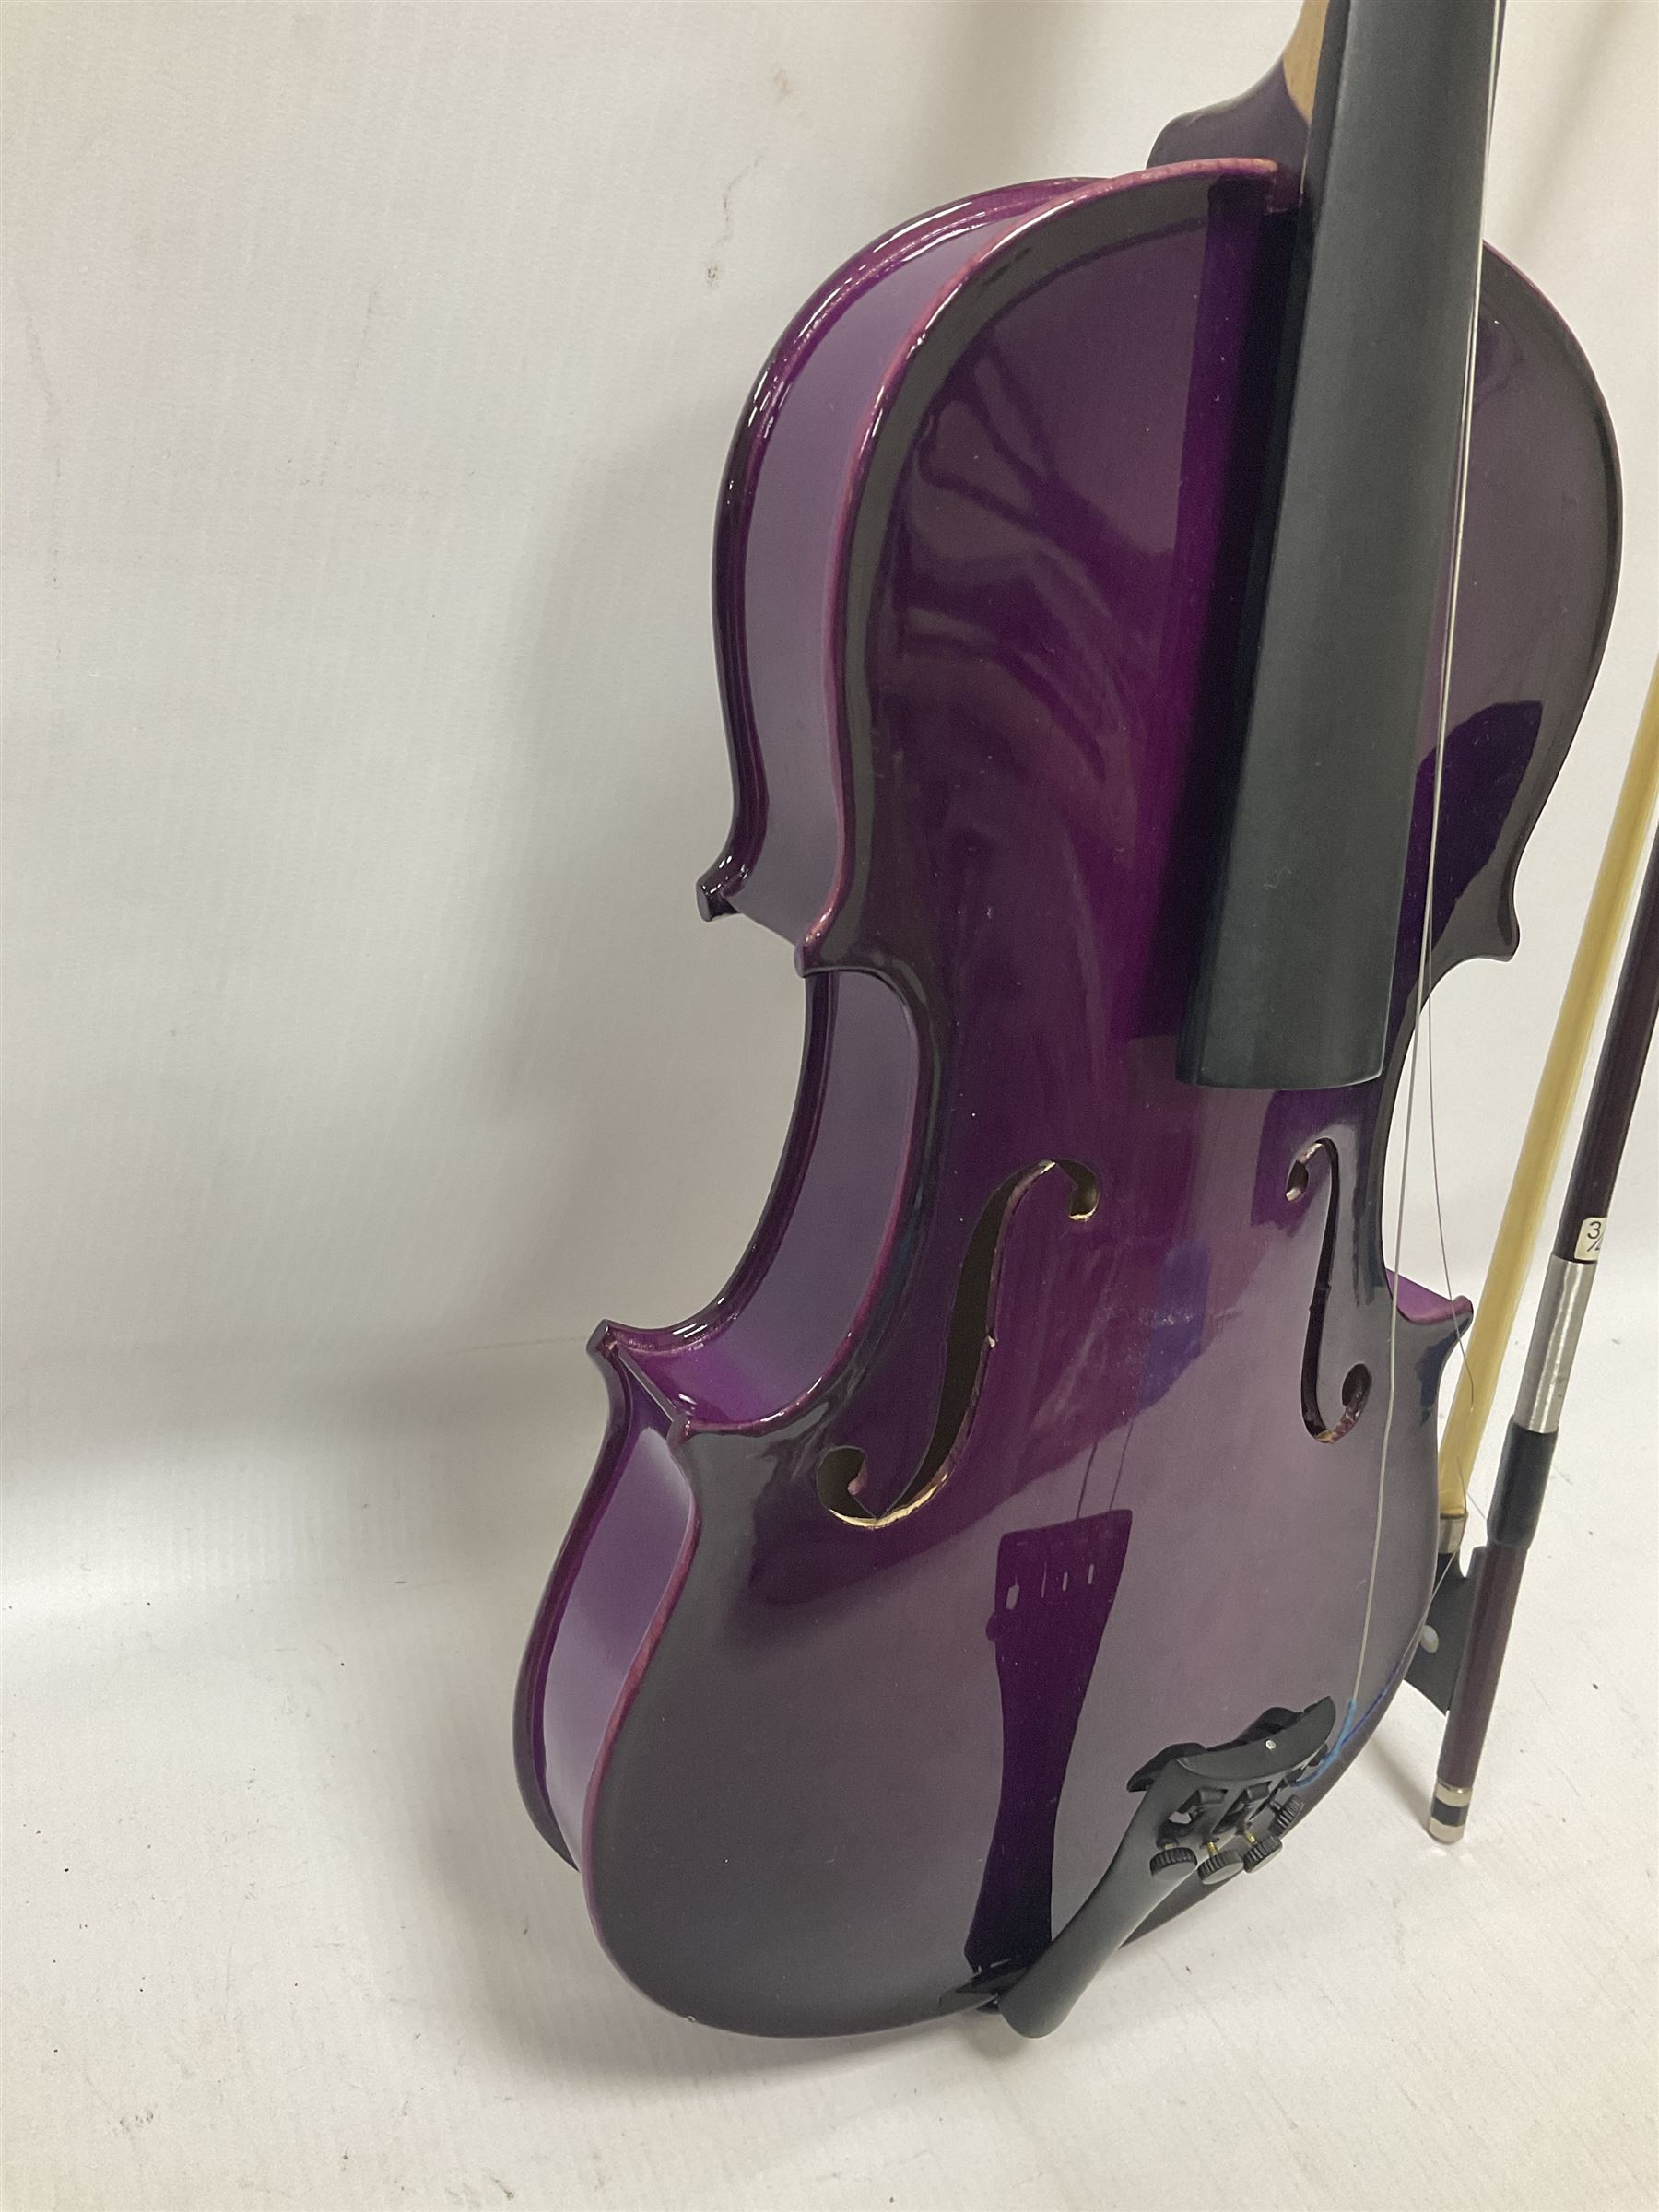 Intermusic 3/4 violin with a violet coloured solid wood body - Image 9 of 25